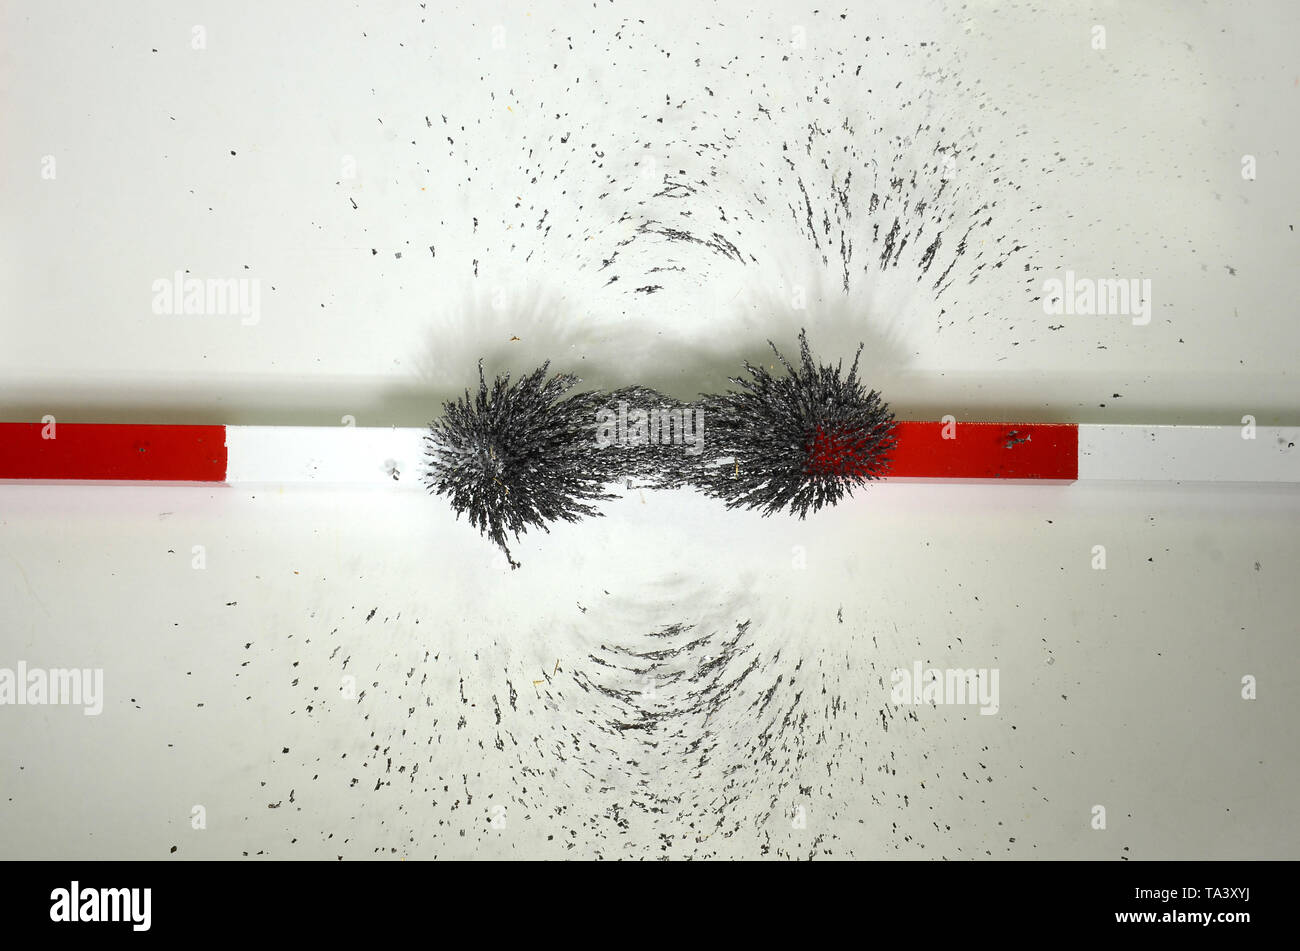 The lines of forces around two magnets with merging and cooperating magnetic fields visualized with iron chips spread on a glass plate that rests on t Stock Photo